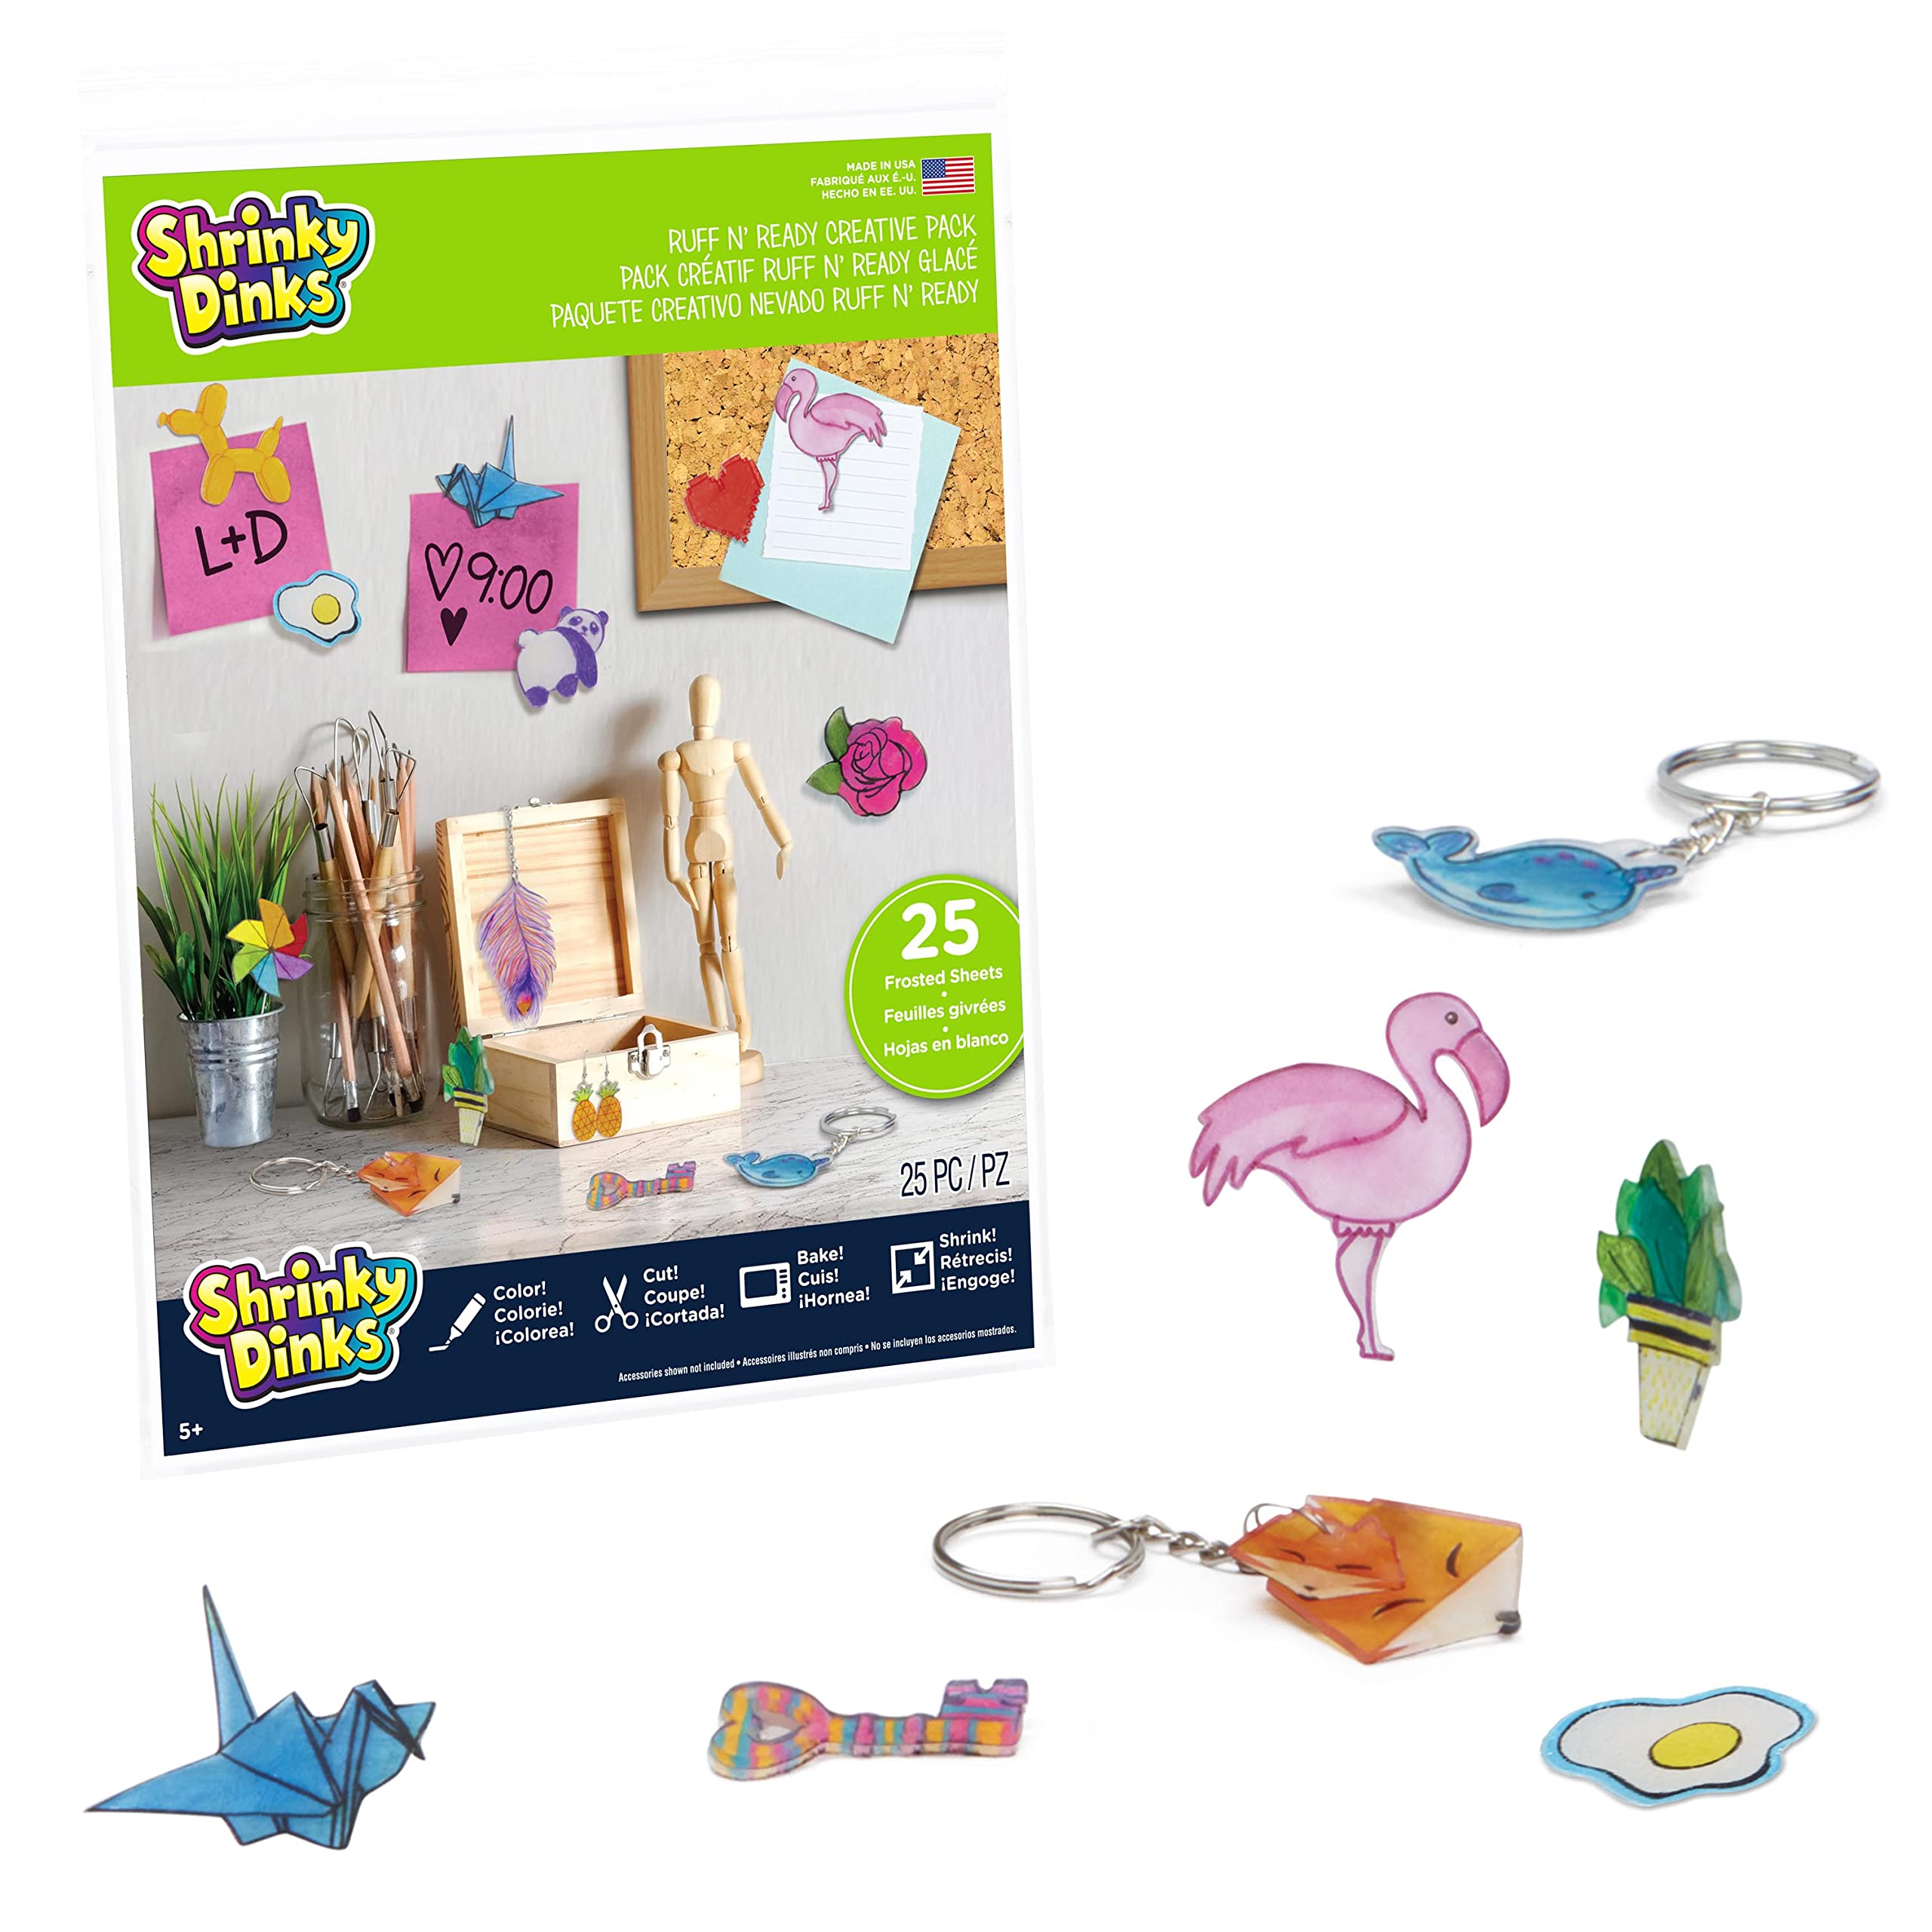 Shrinky Dinks Ruff n’ Ready Creative Pack, Basket Stuffers, 25 Frosted White Sheets, Kids Arts and Crafts Activity Set, Kids Toys for Ages 6 Up, Gifts and Presents by Just Play